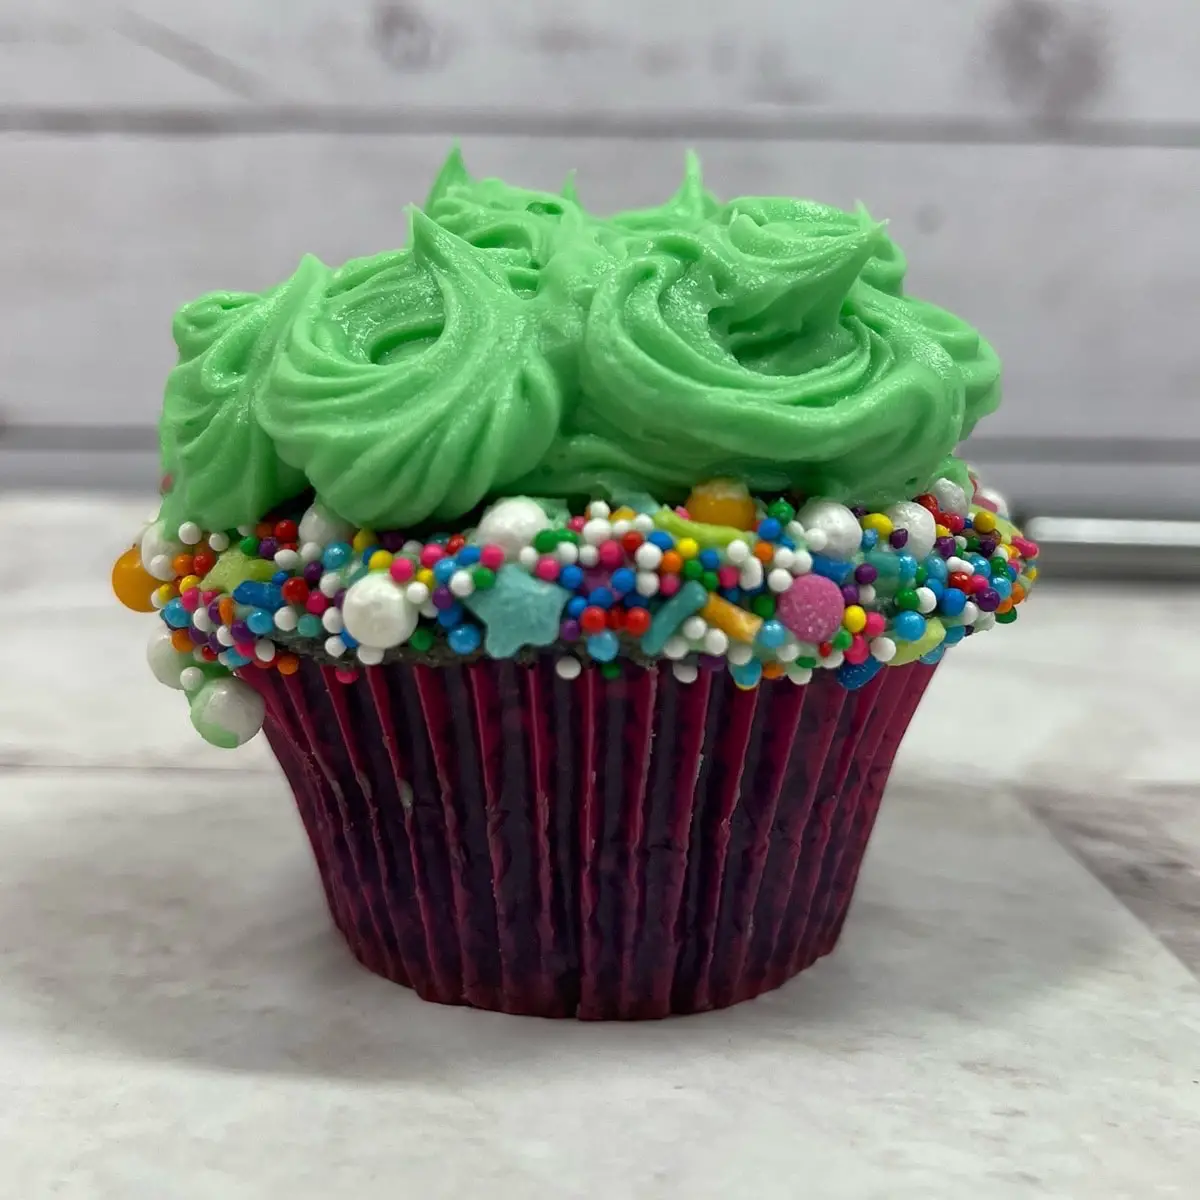 St Patrick’s Day Themed Cupcakes